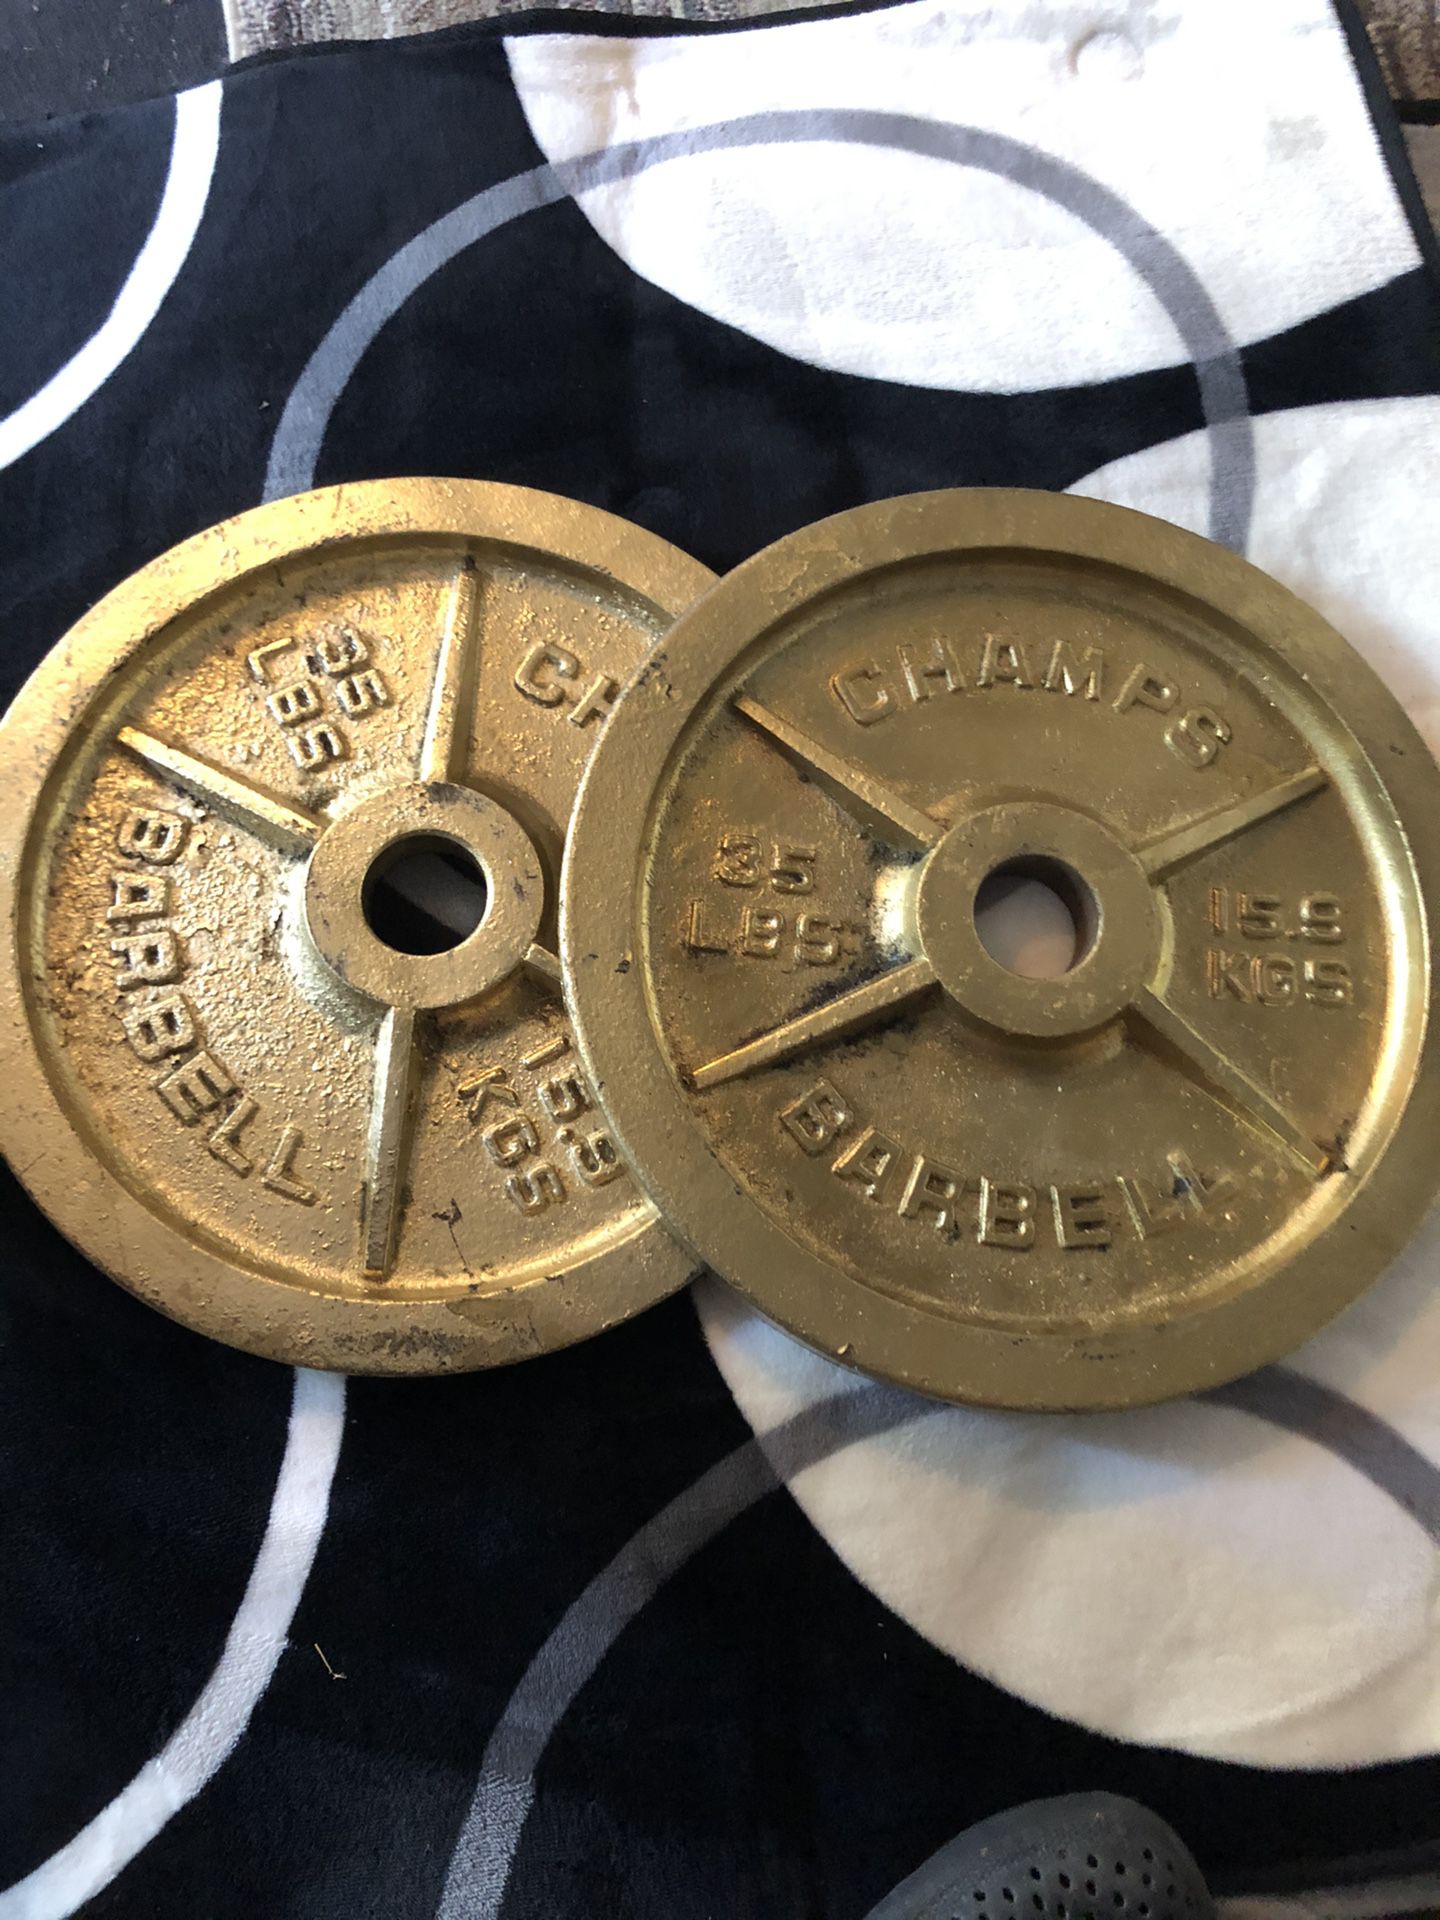 2 35lbs Olympic weights